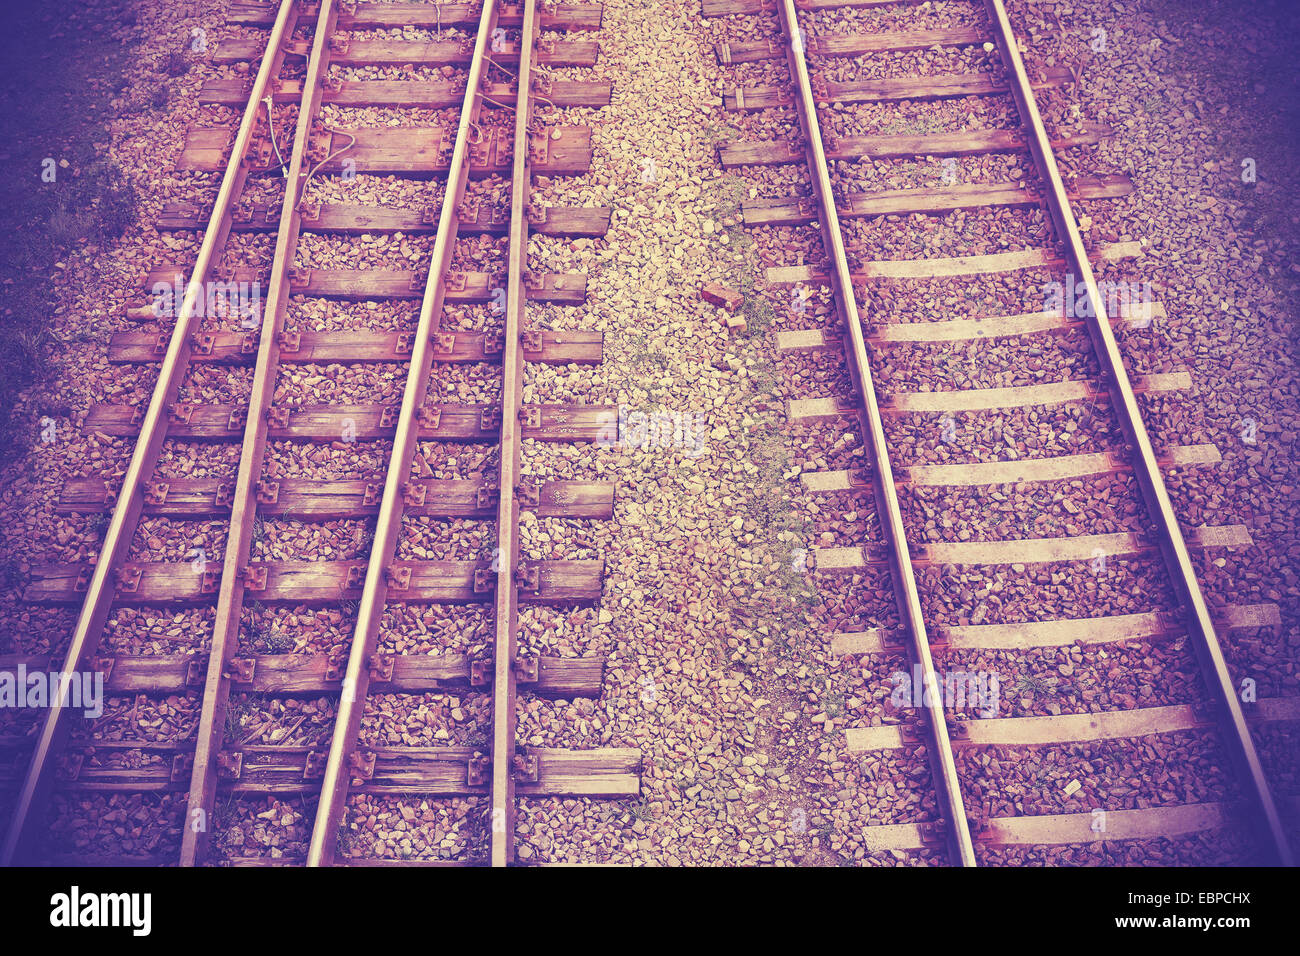 Vintage retro filtered picture of railway tracks. Stock Photo